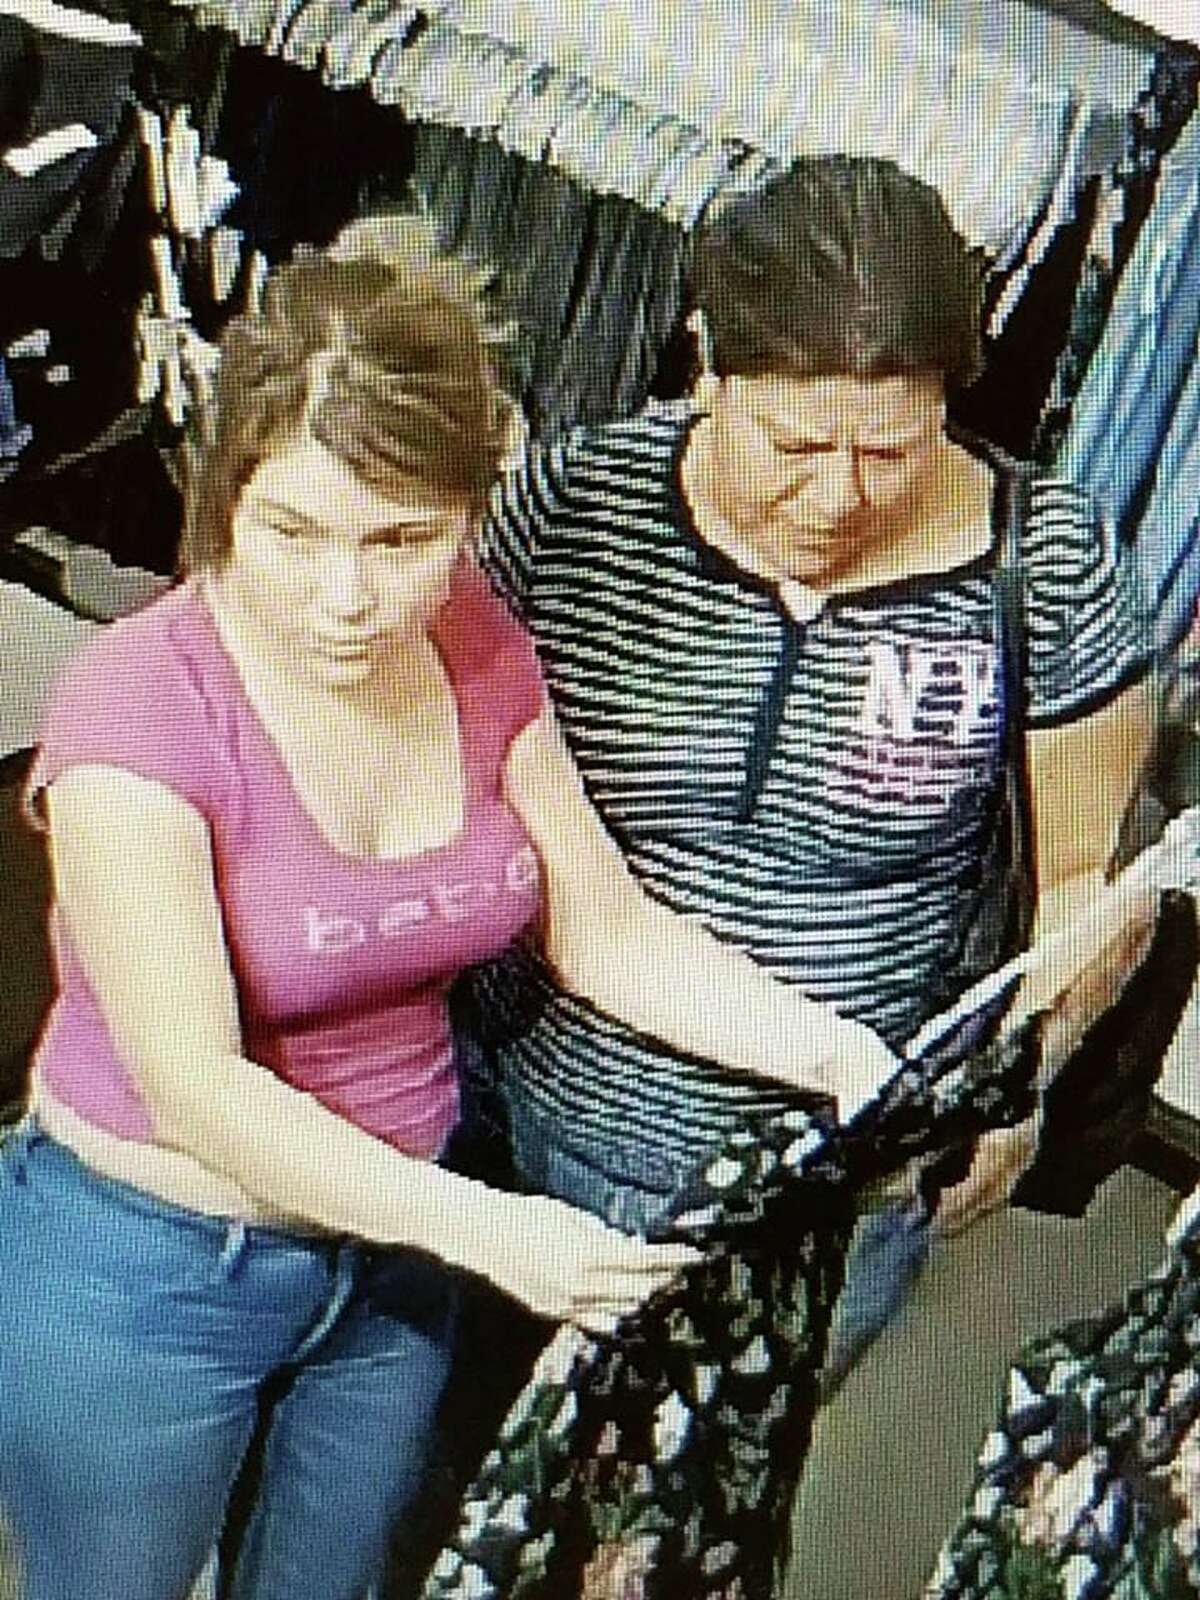 Detectives are highlighting a trio of women for the purposes of identification after being seen shoplifting from a local store.